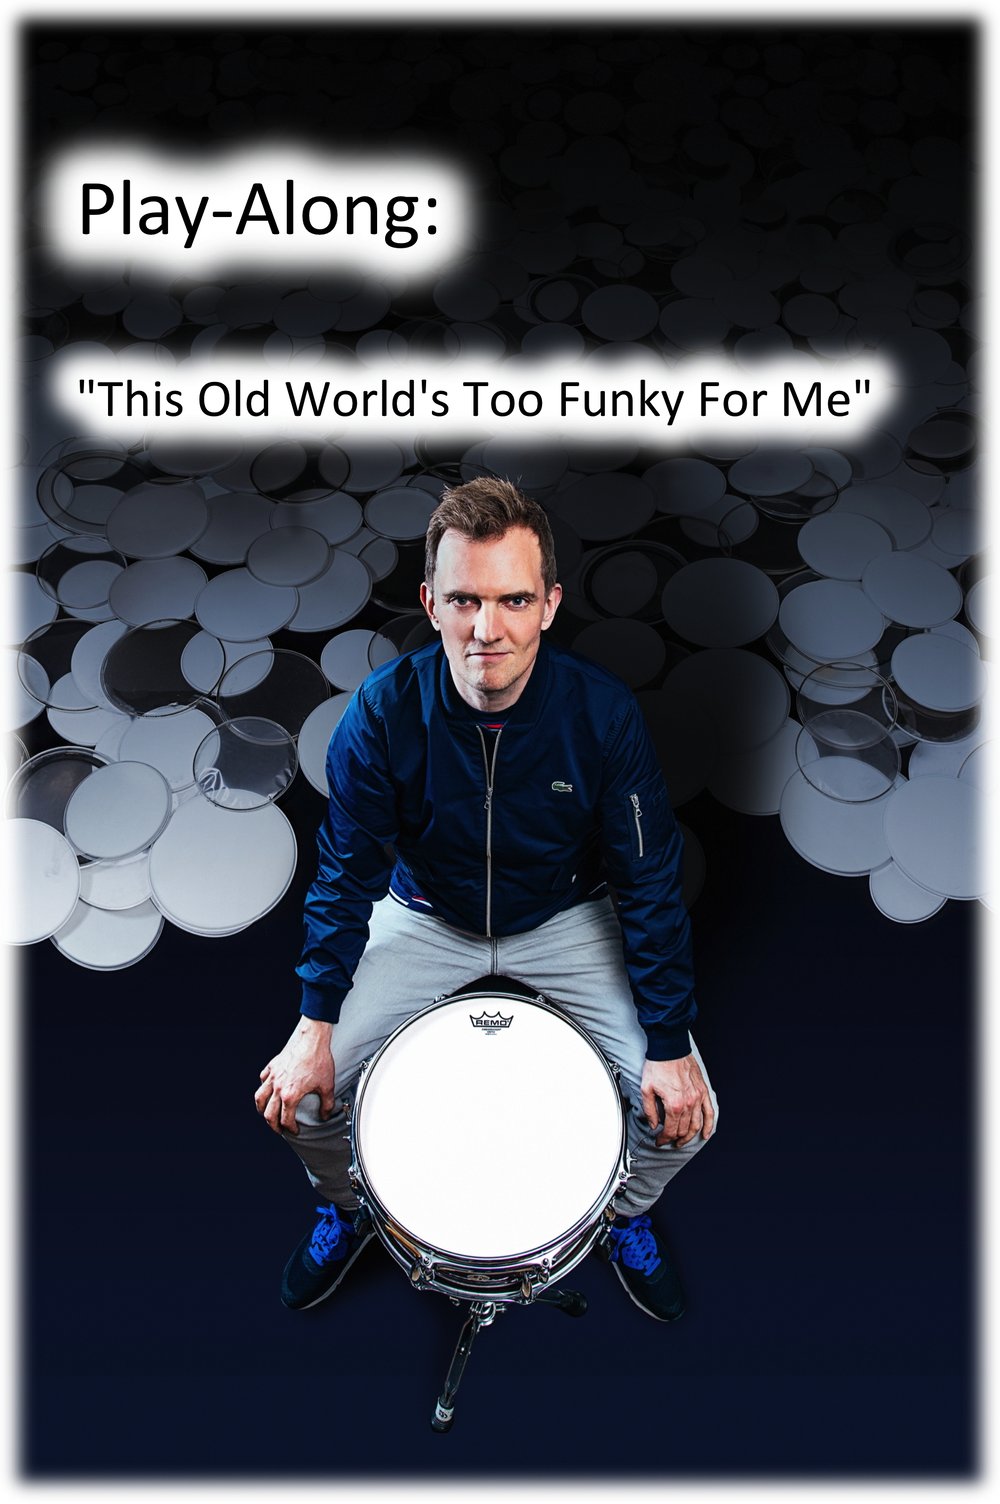 Image of Play-Along: "This Old World's Too Funky For Me"